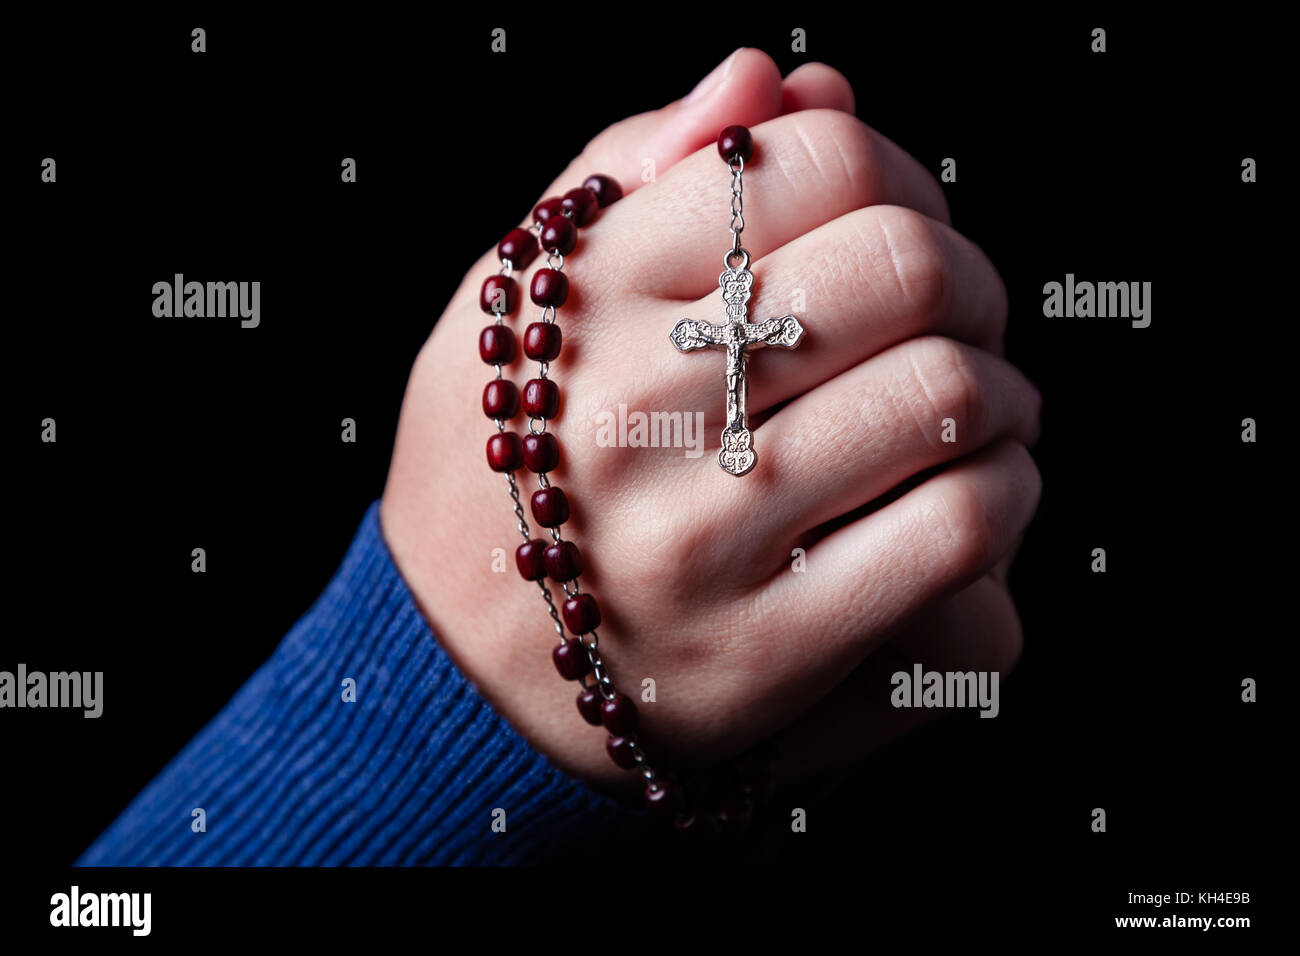 Female hands praying holding a rosary with Jesus Christ in the cross or Crucifix on black background. Woman with Christian Catholic faith hand Stock Photo